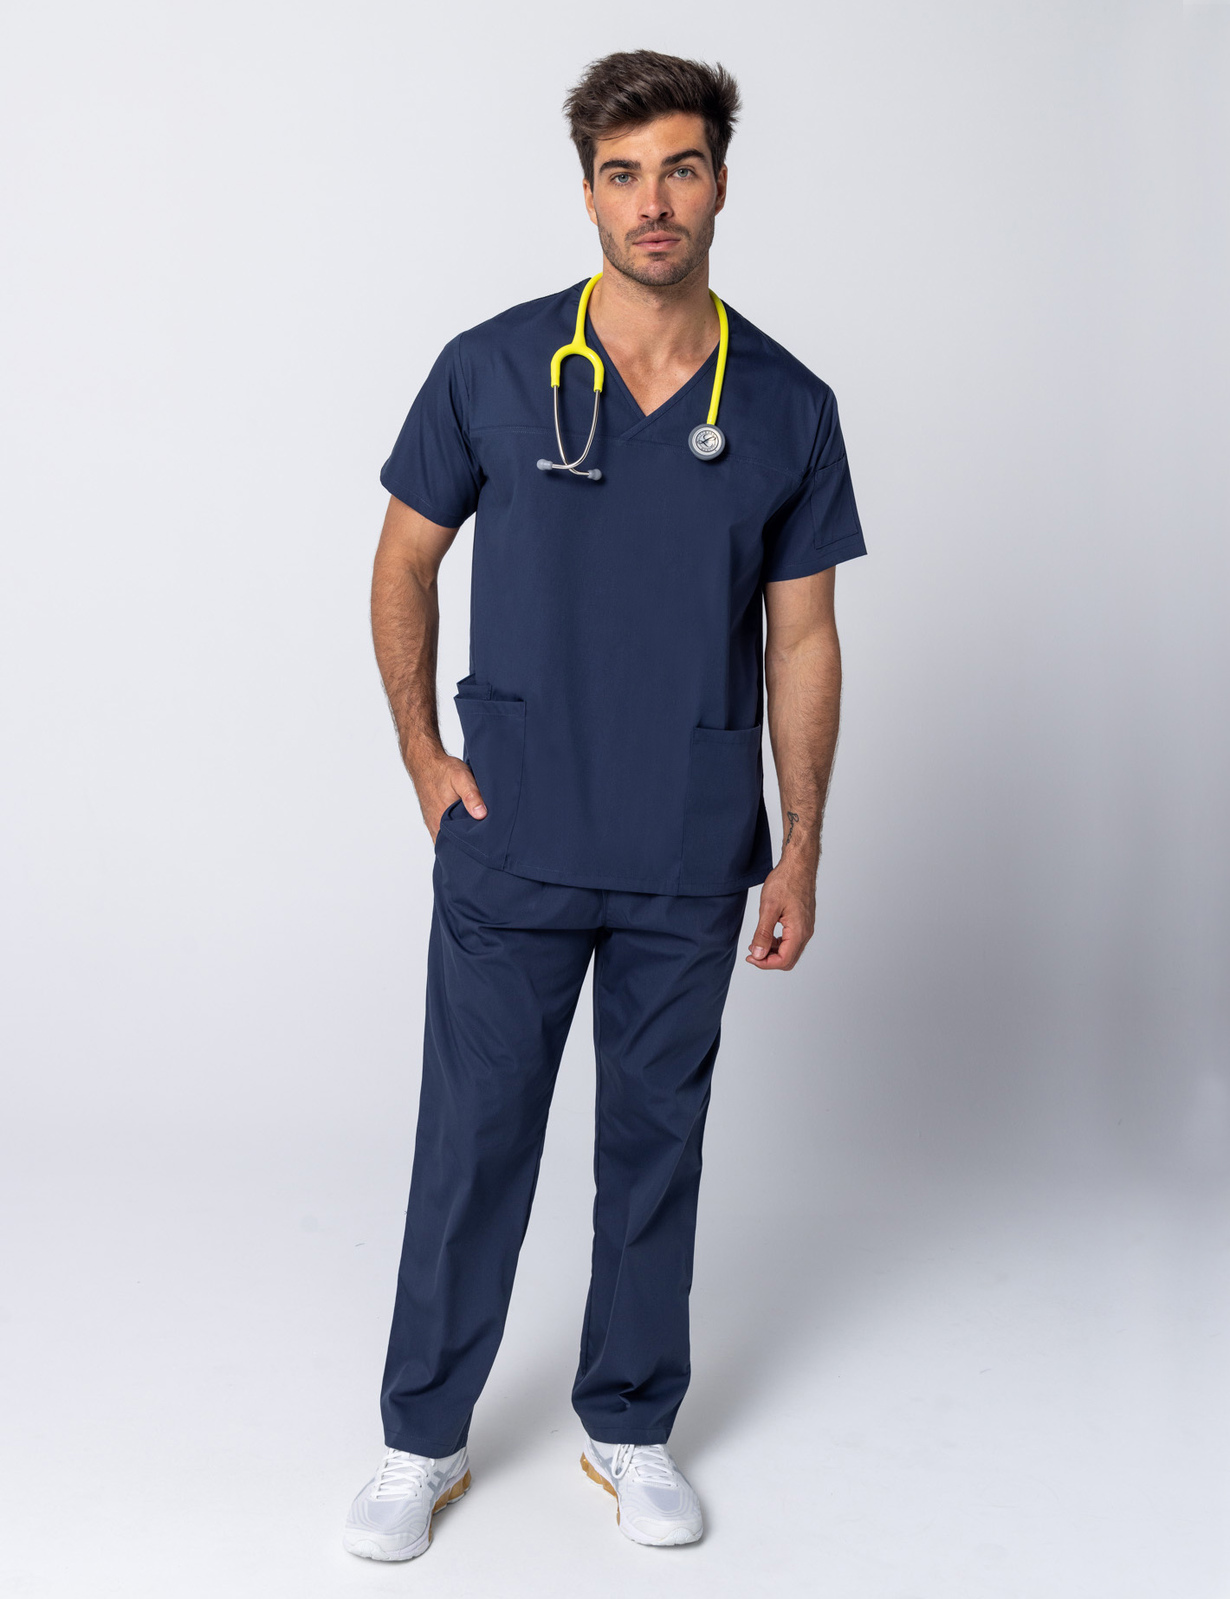 Men's Fit Solid Scrub Top - Navy - X Small